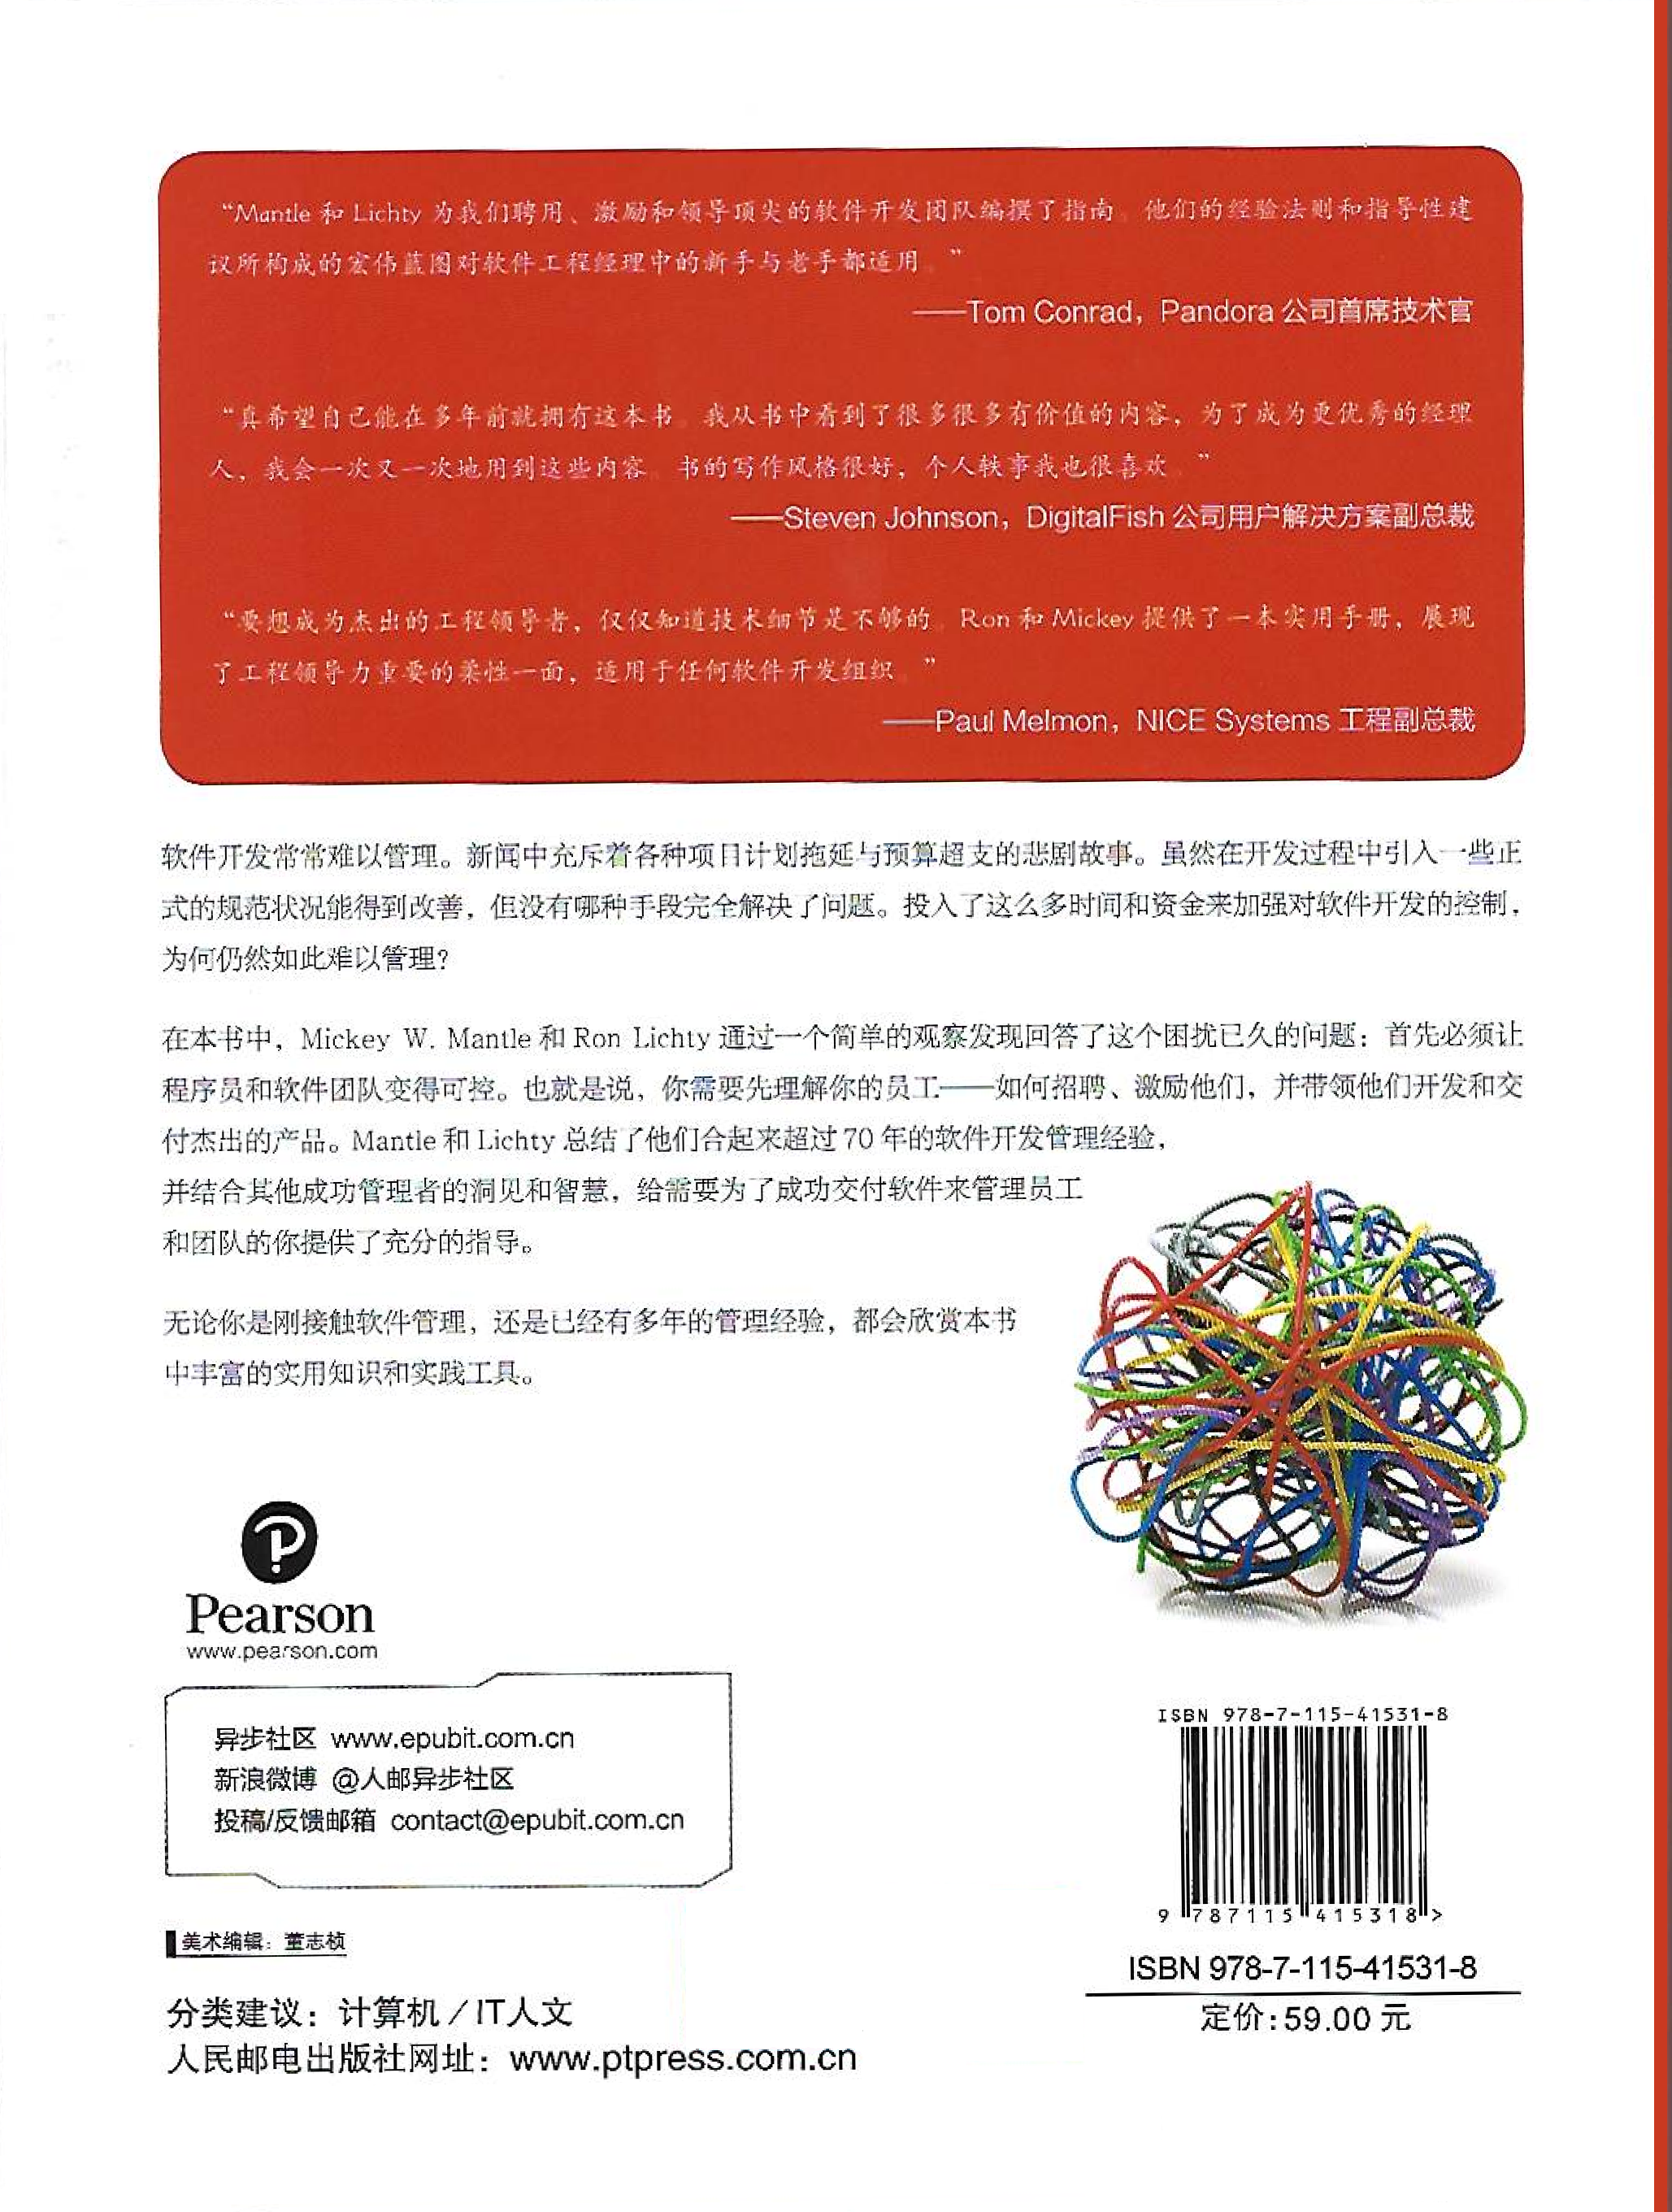 back cover: Managing the Unmanageable, translated into simplified Chinese